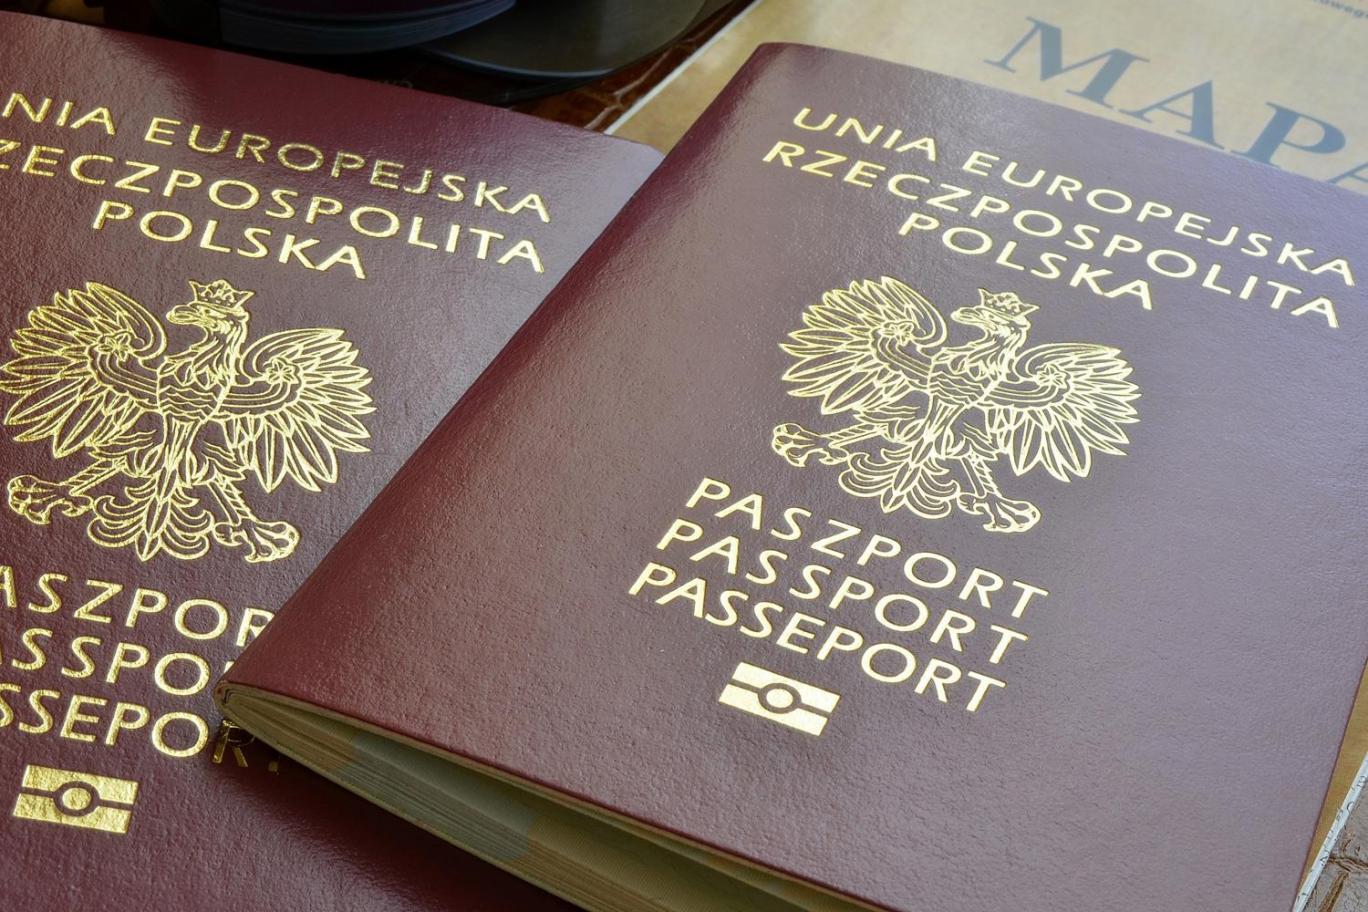 Vietnam Electronic Visa (E-Visa) is Officially Extended for Polish up to 2021